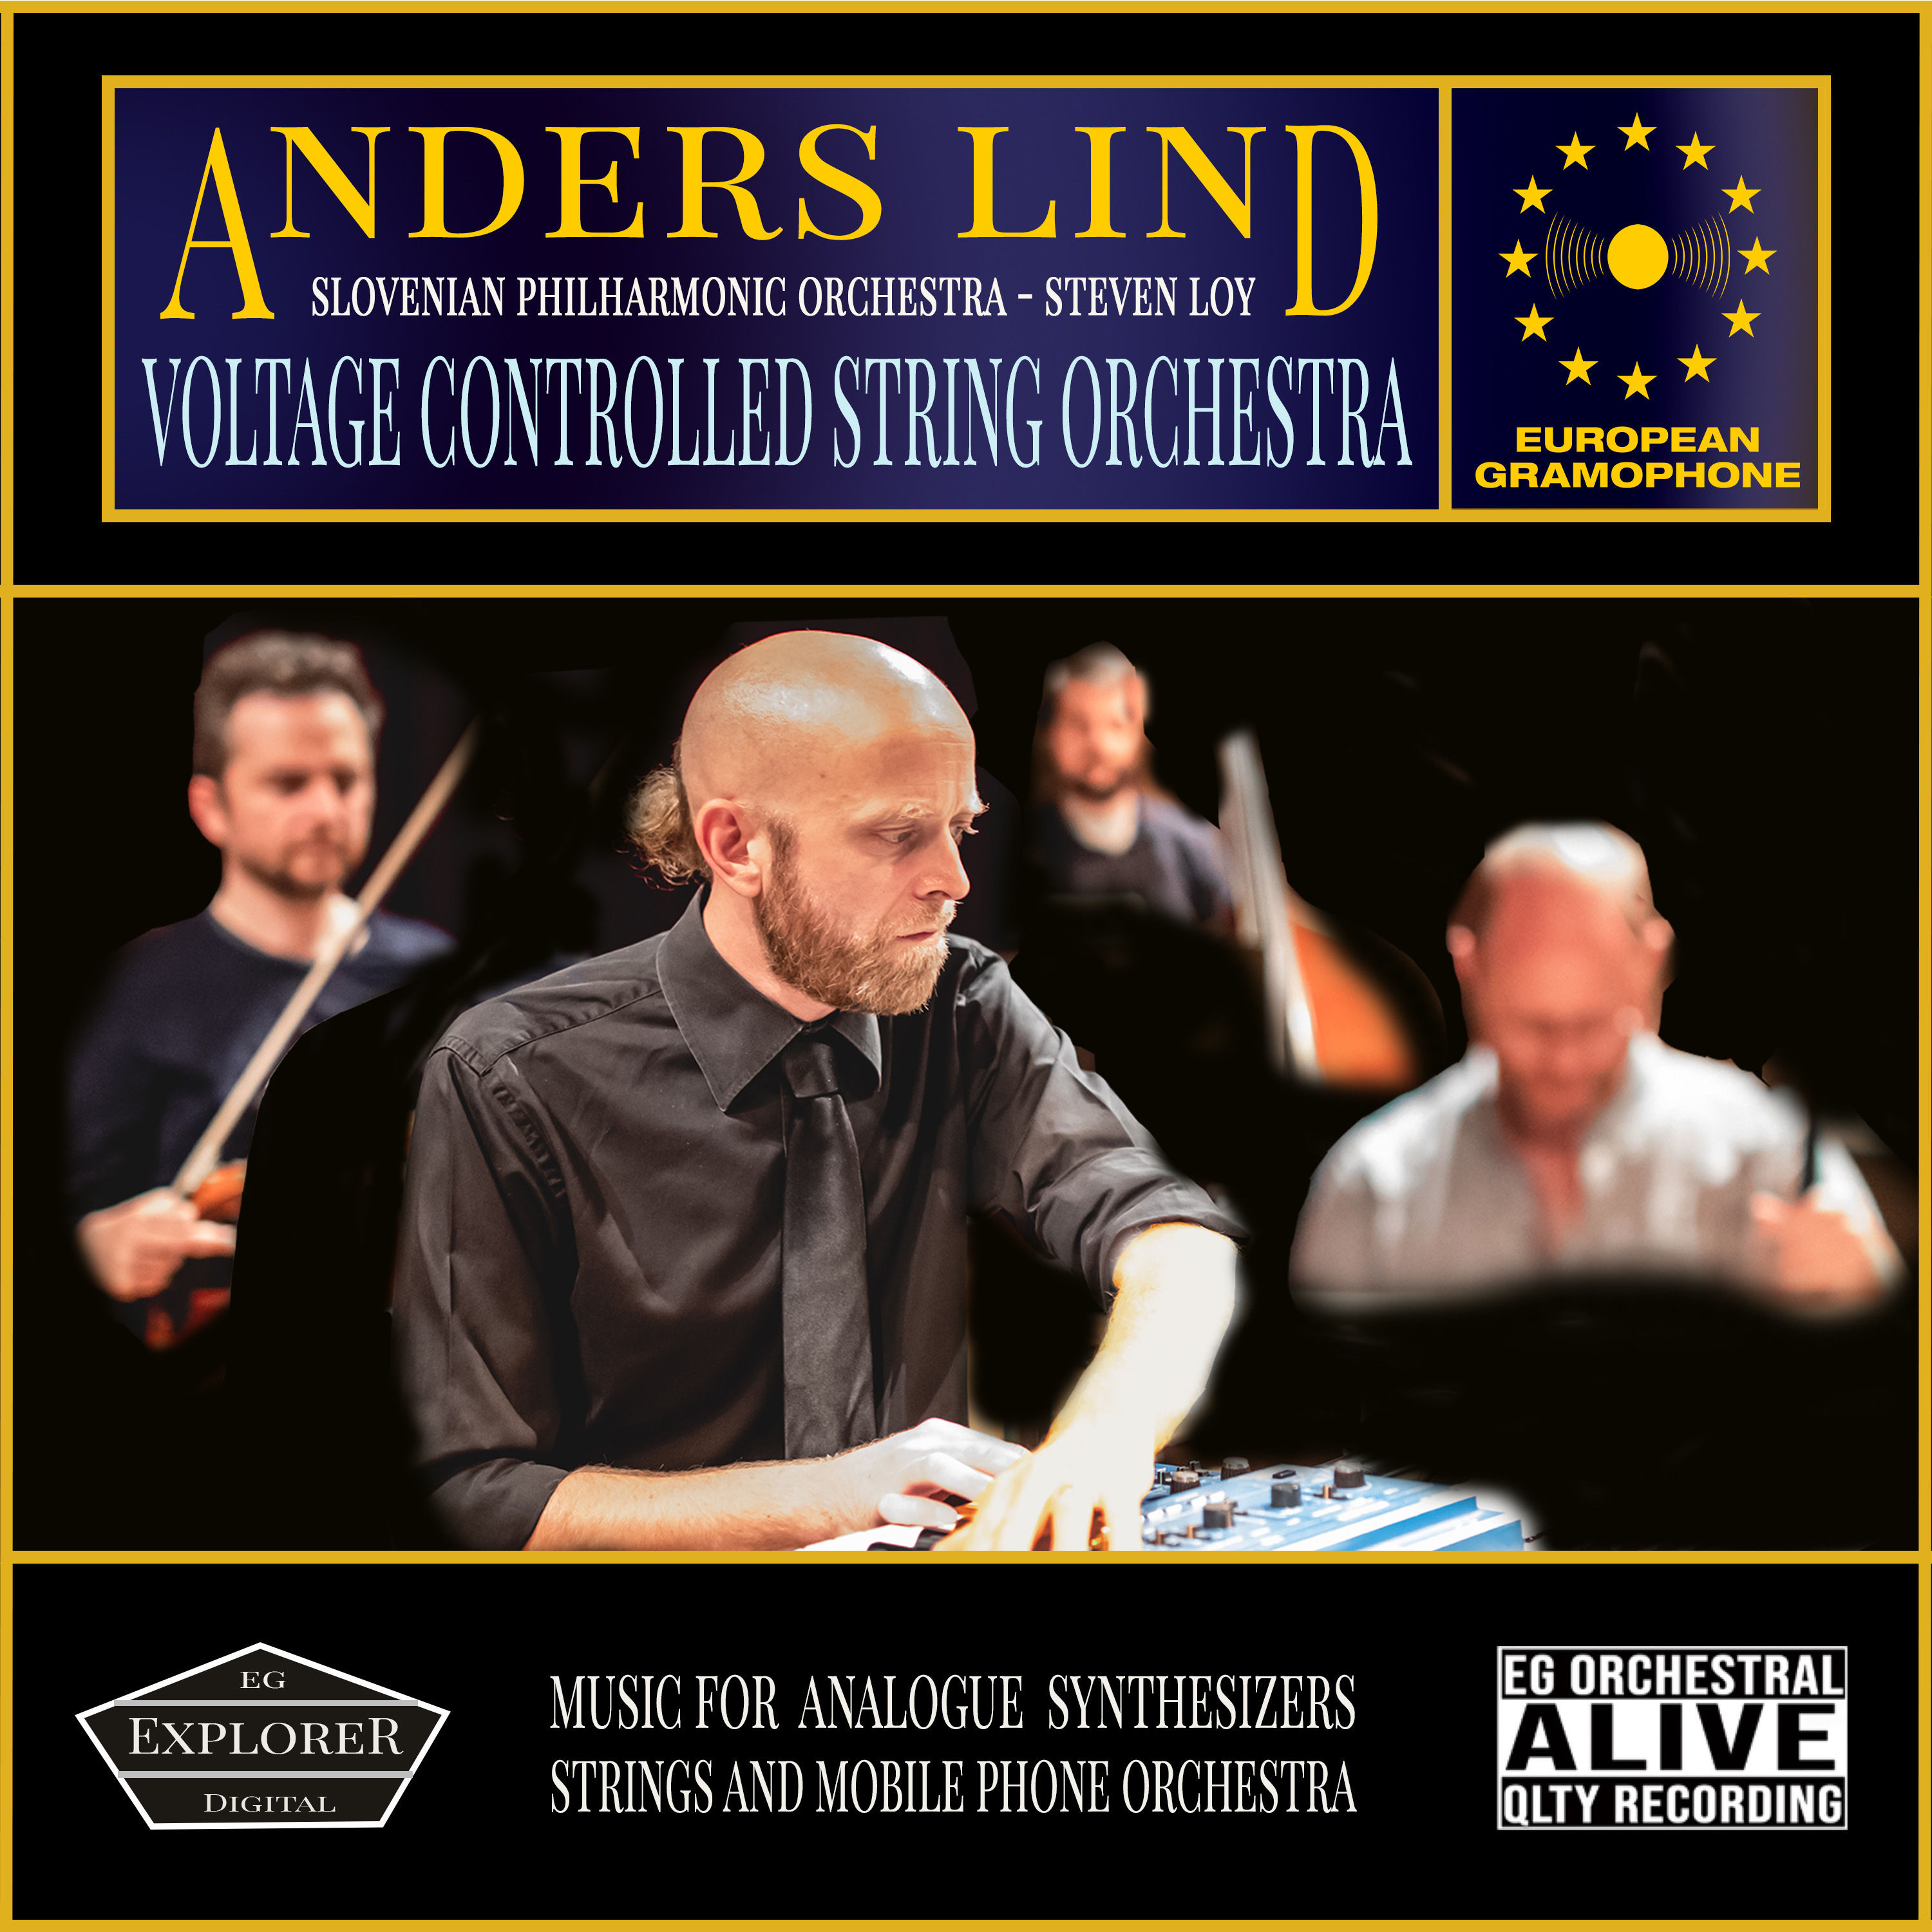 Anders Lind, Slovenian Philharmonic Orchestra and Steven Loy – Voltage Controlled Orchestra (2021) [FLAC 24bit/48kHz]